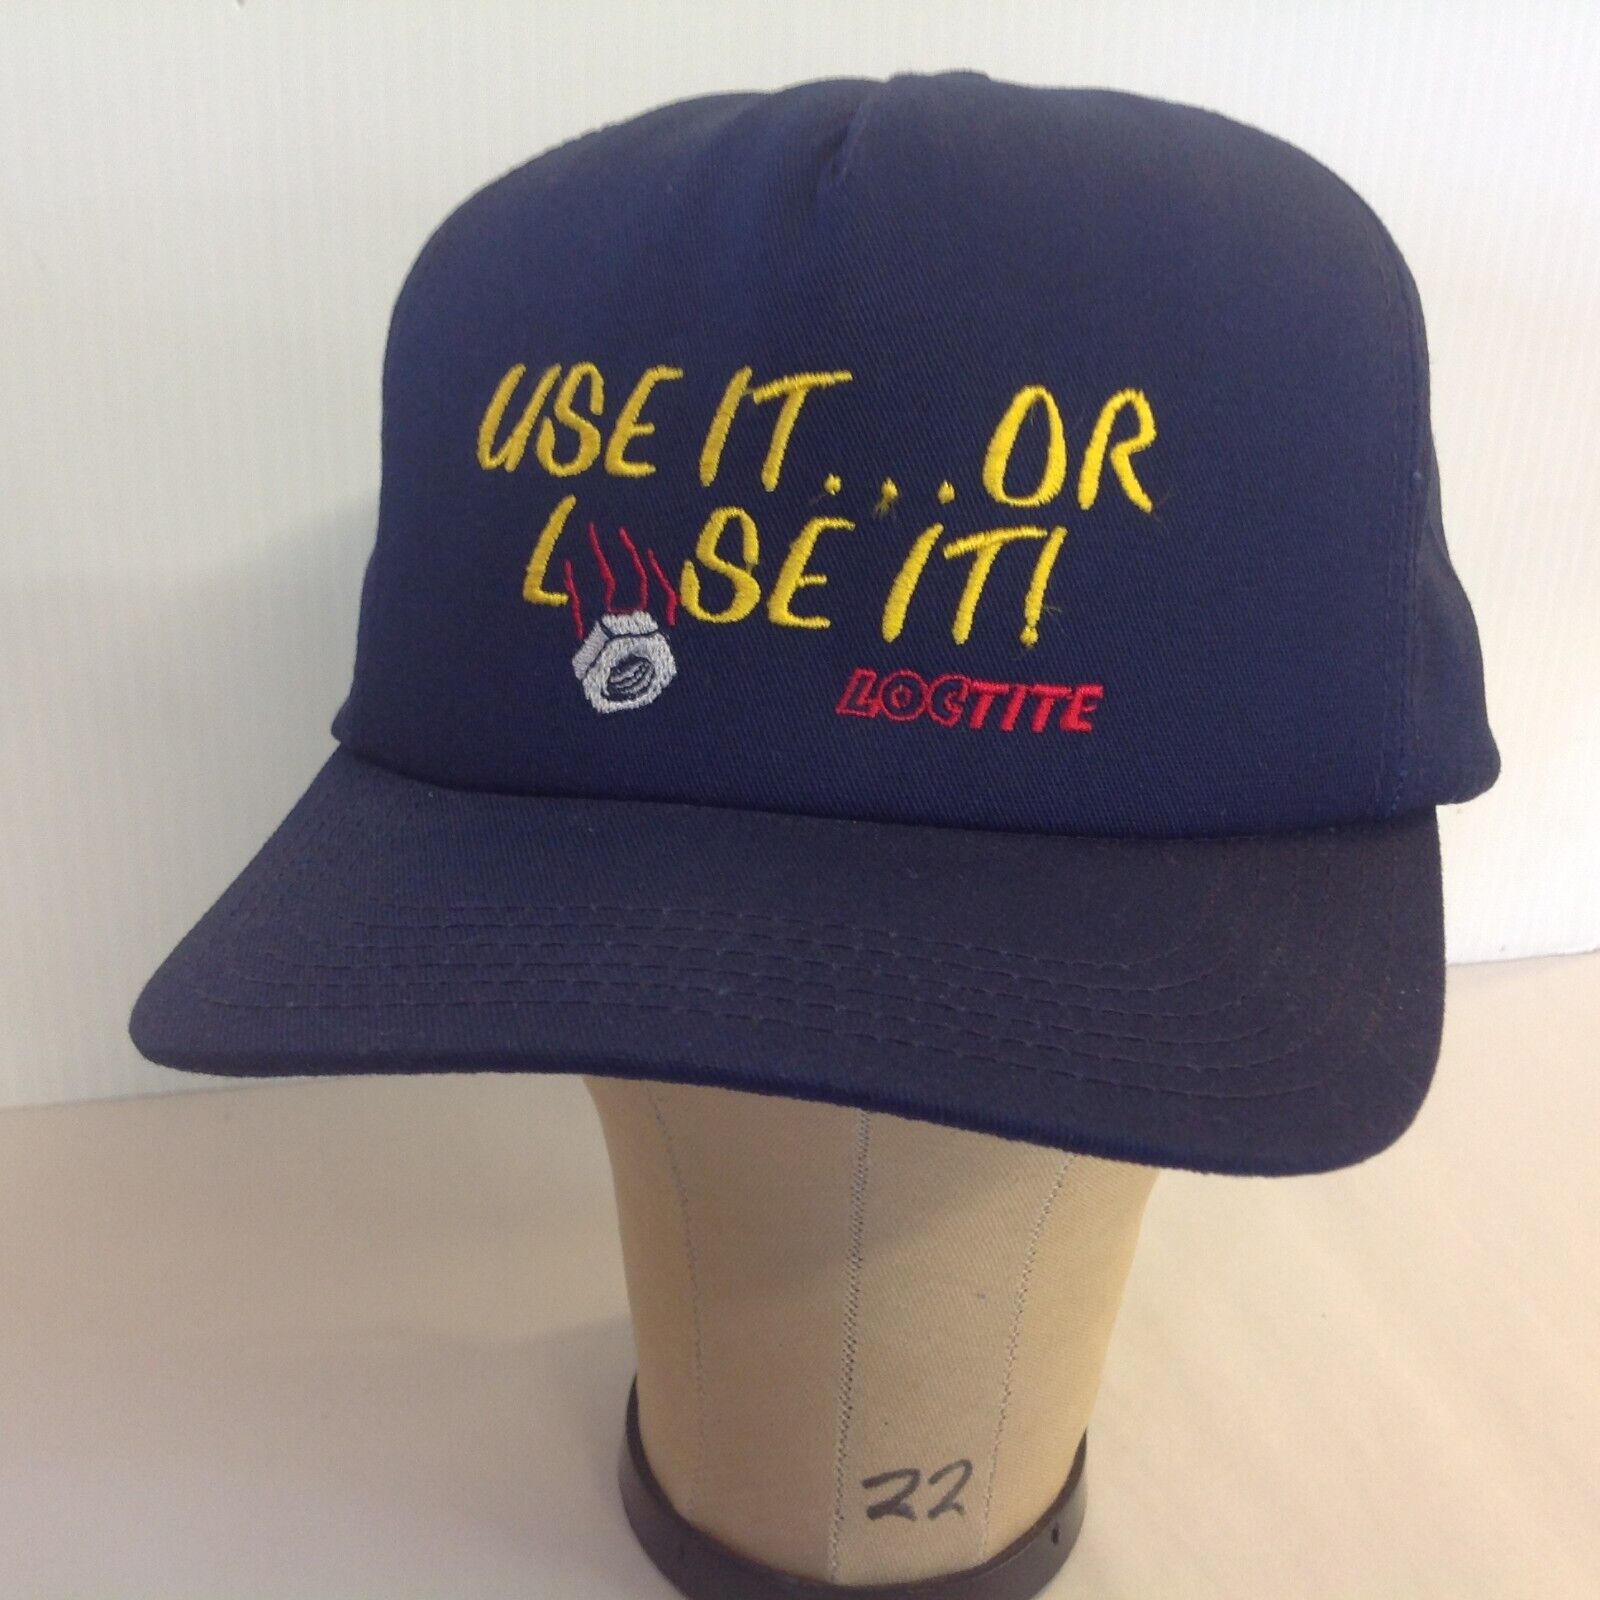 Vtg LOCTite Use It Or Lose It Baseball Cap Hat Navy Blue Nut Logo Embroidered